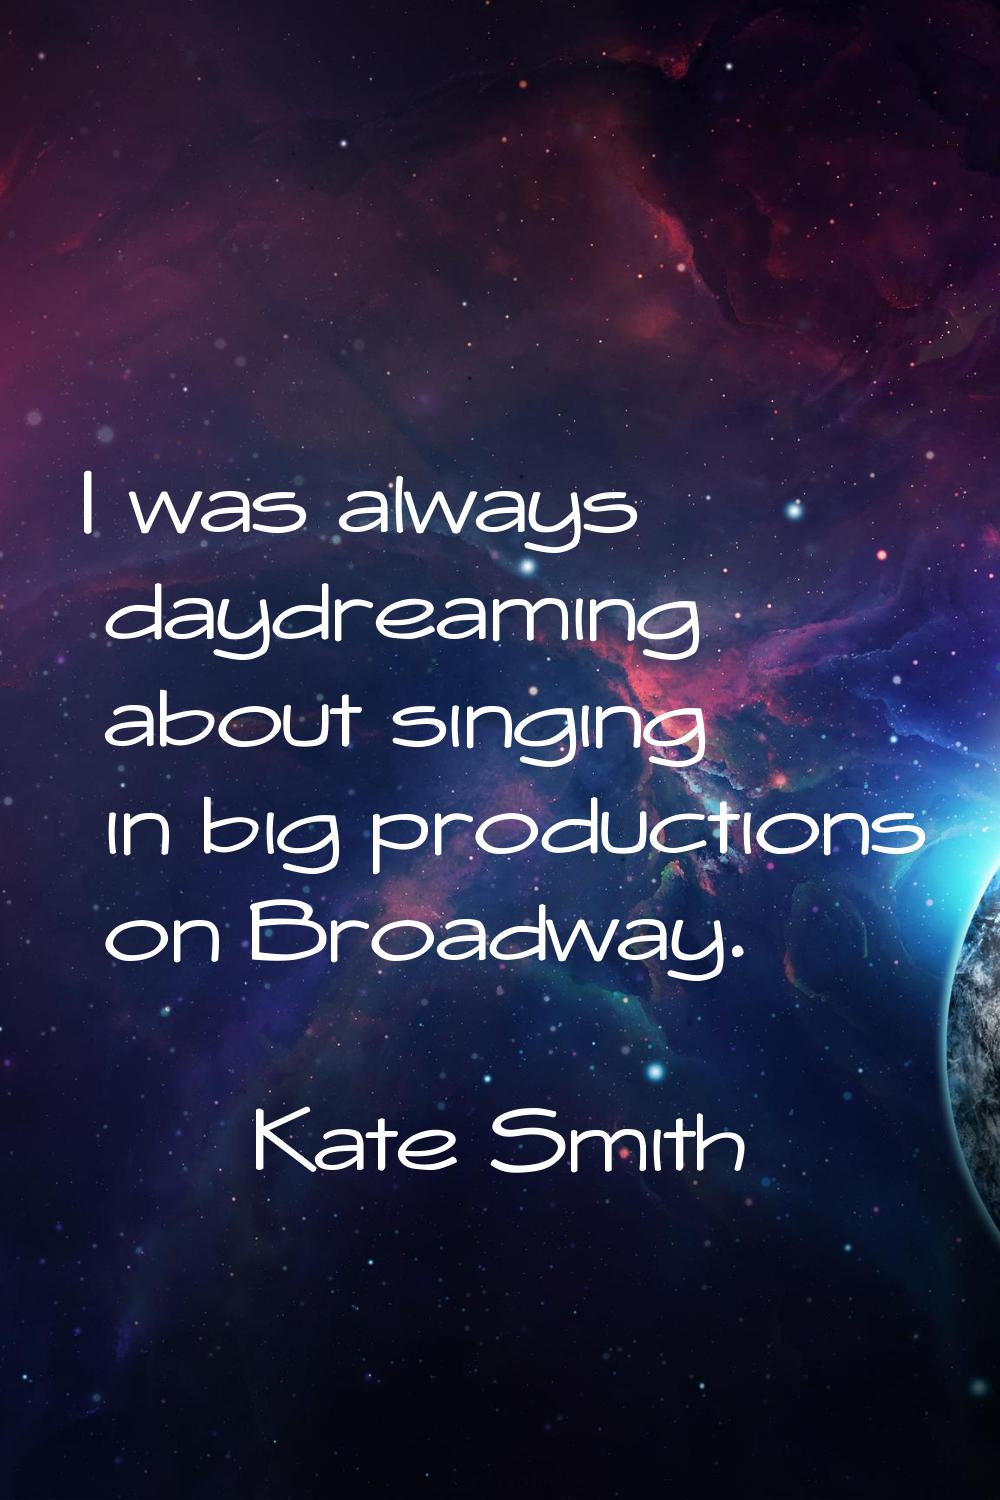 I was always daydreaming about singing in big productions on Broadway.